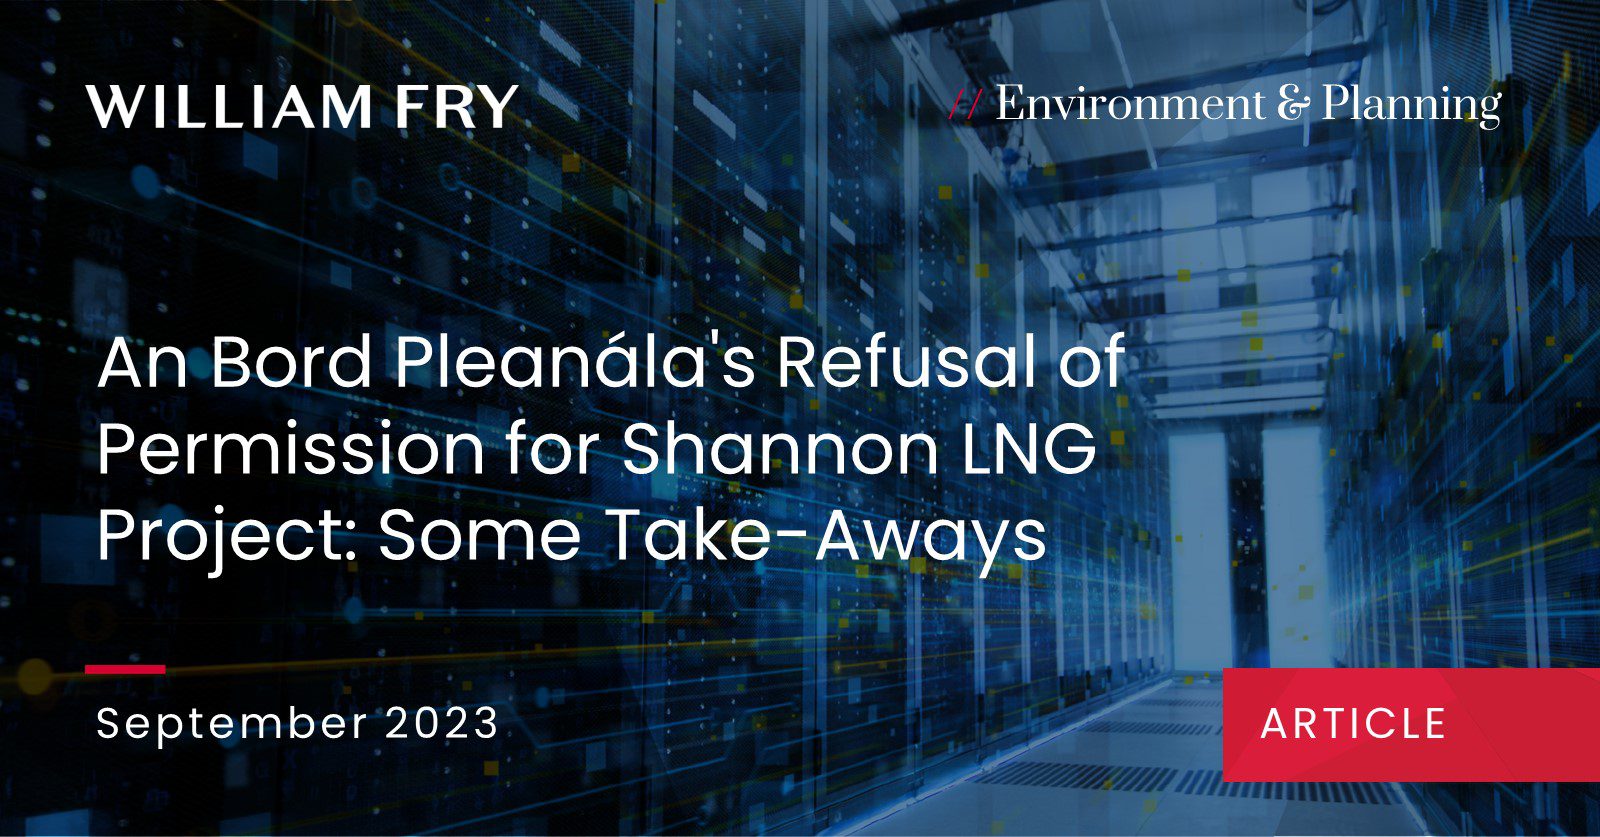 An Bord Pleanála's Refusal of Permission for Shannon LNG Project: Some Take-Aways